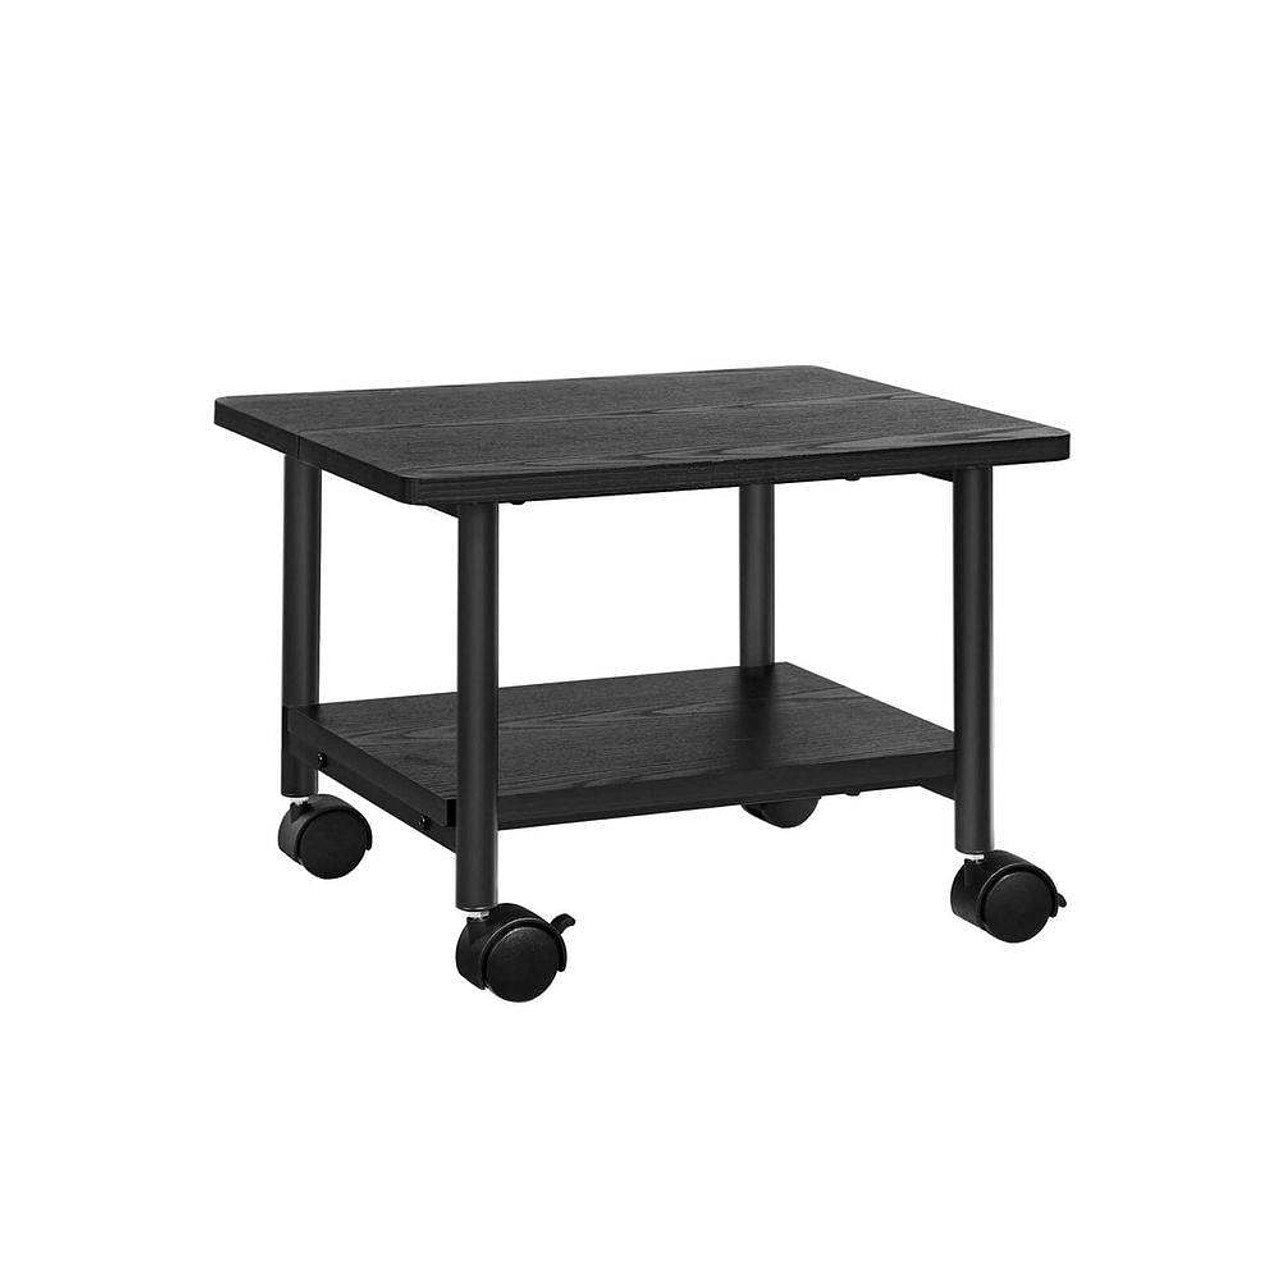 Industrial Black Metal Wood Low-Profile Printer Stand with Bottom Paper Shelf